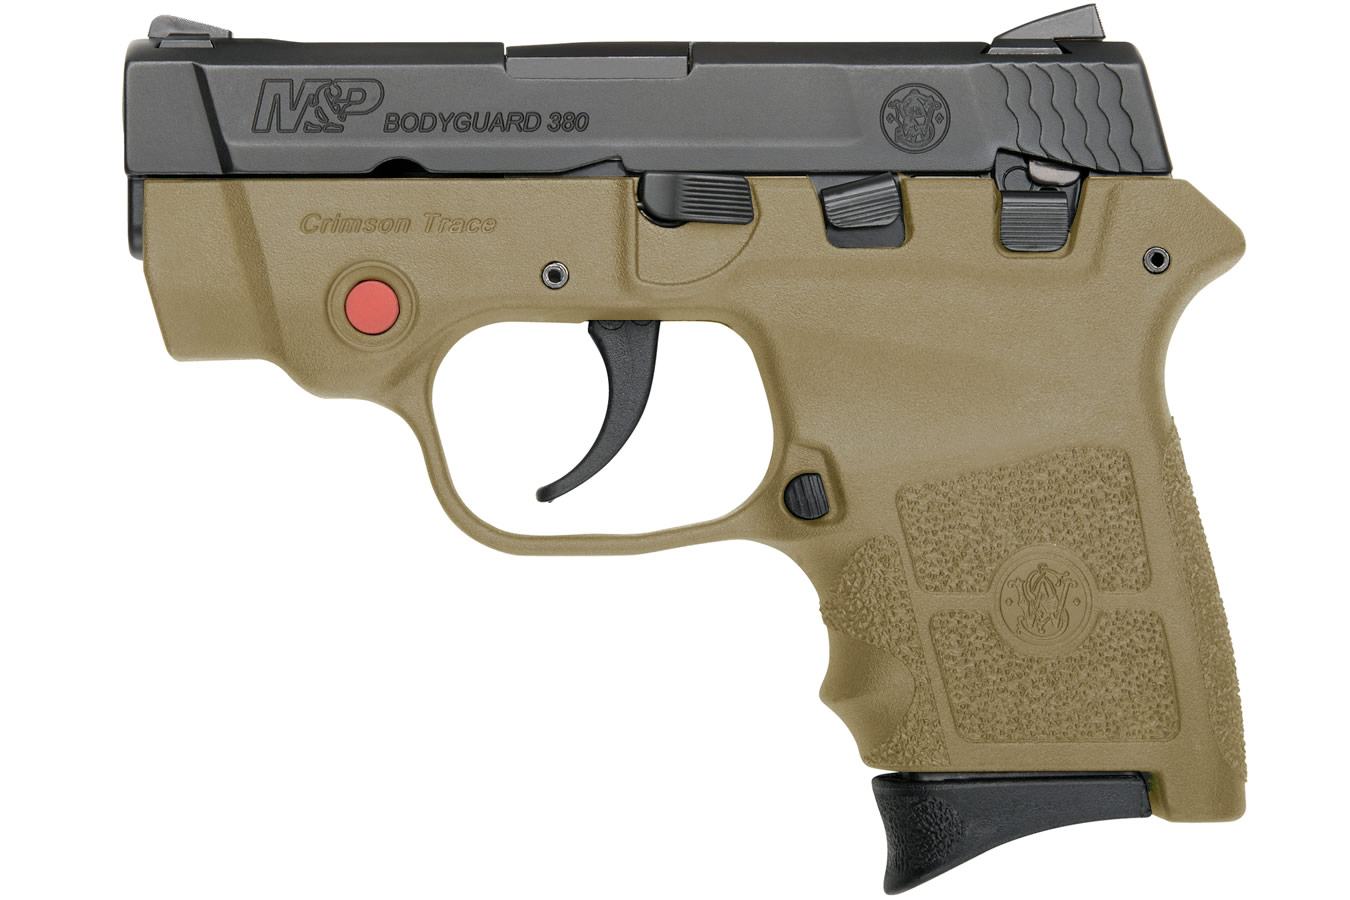 SMITH AND WESSON MP BODYGUARD 380 FDE WITH LASER